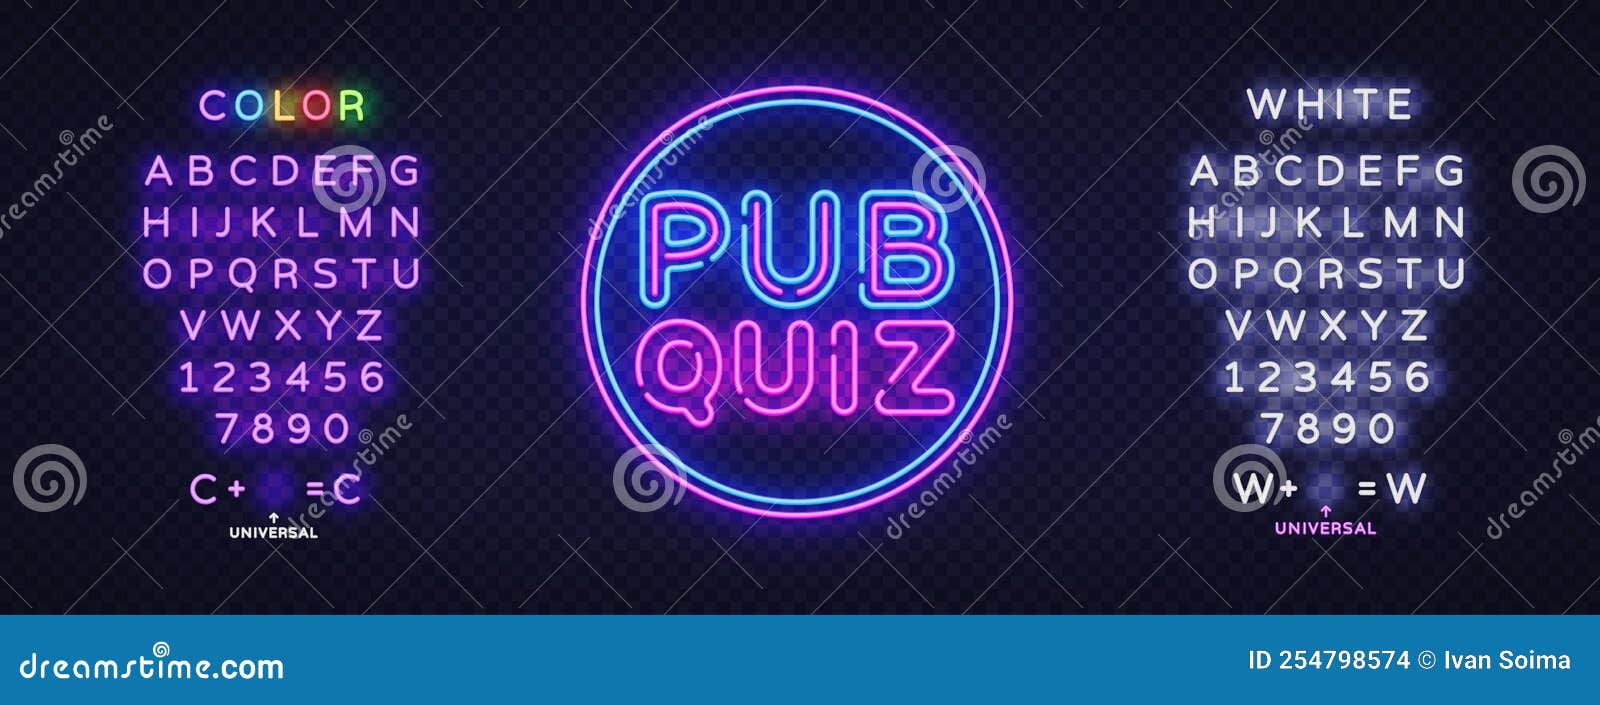 pub quiz in neon style on light background. communication concept. banner .   